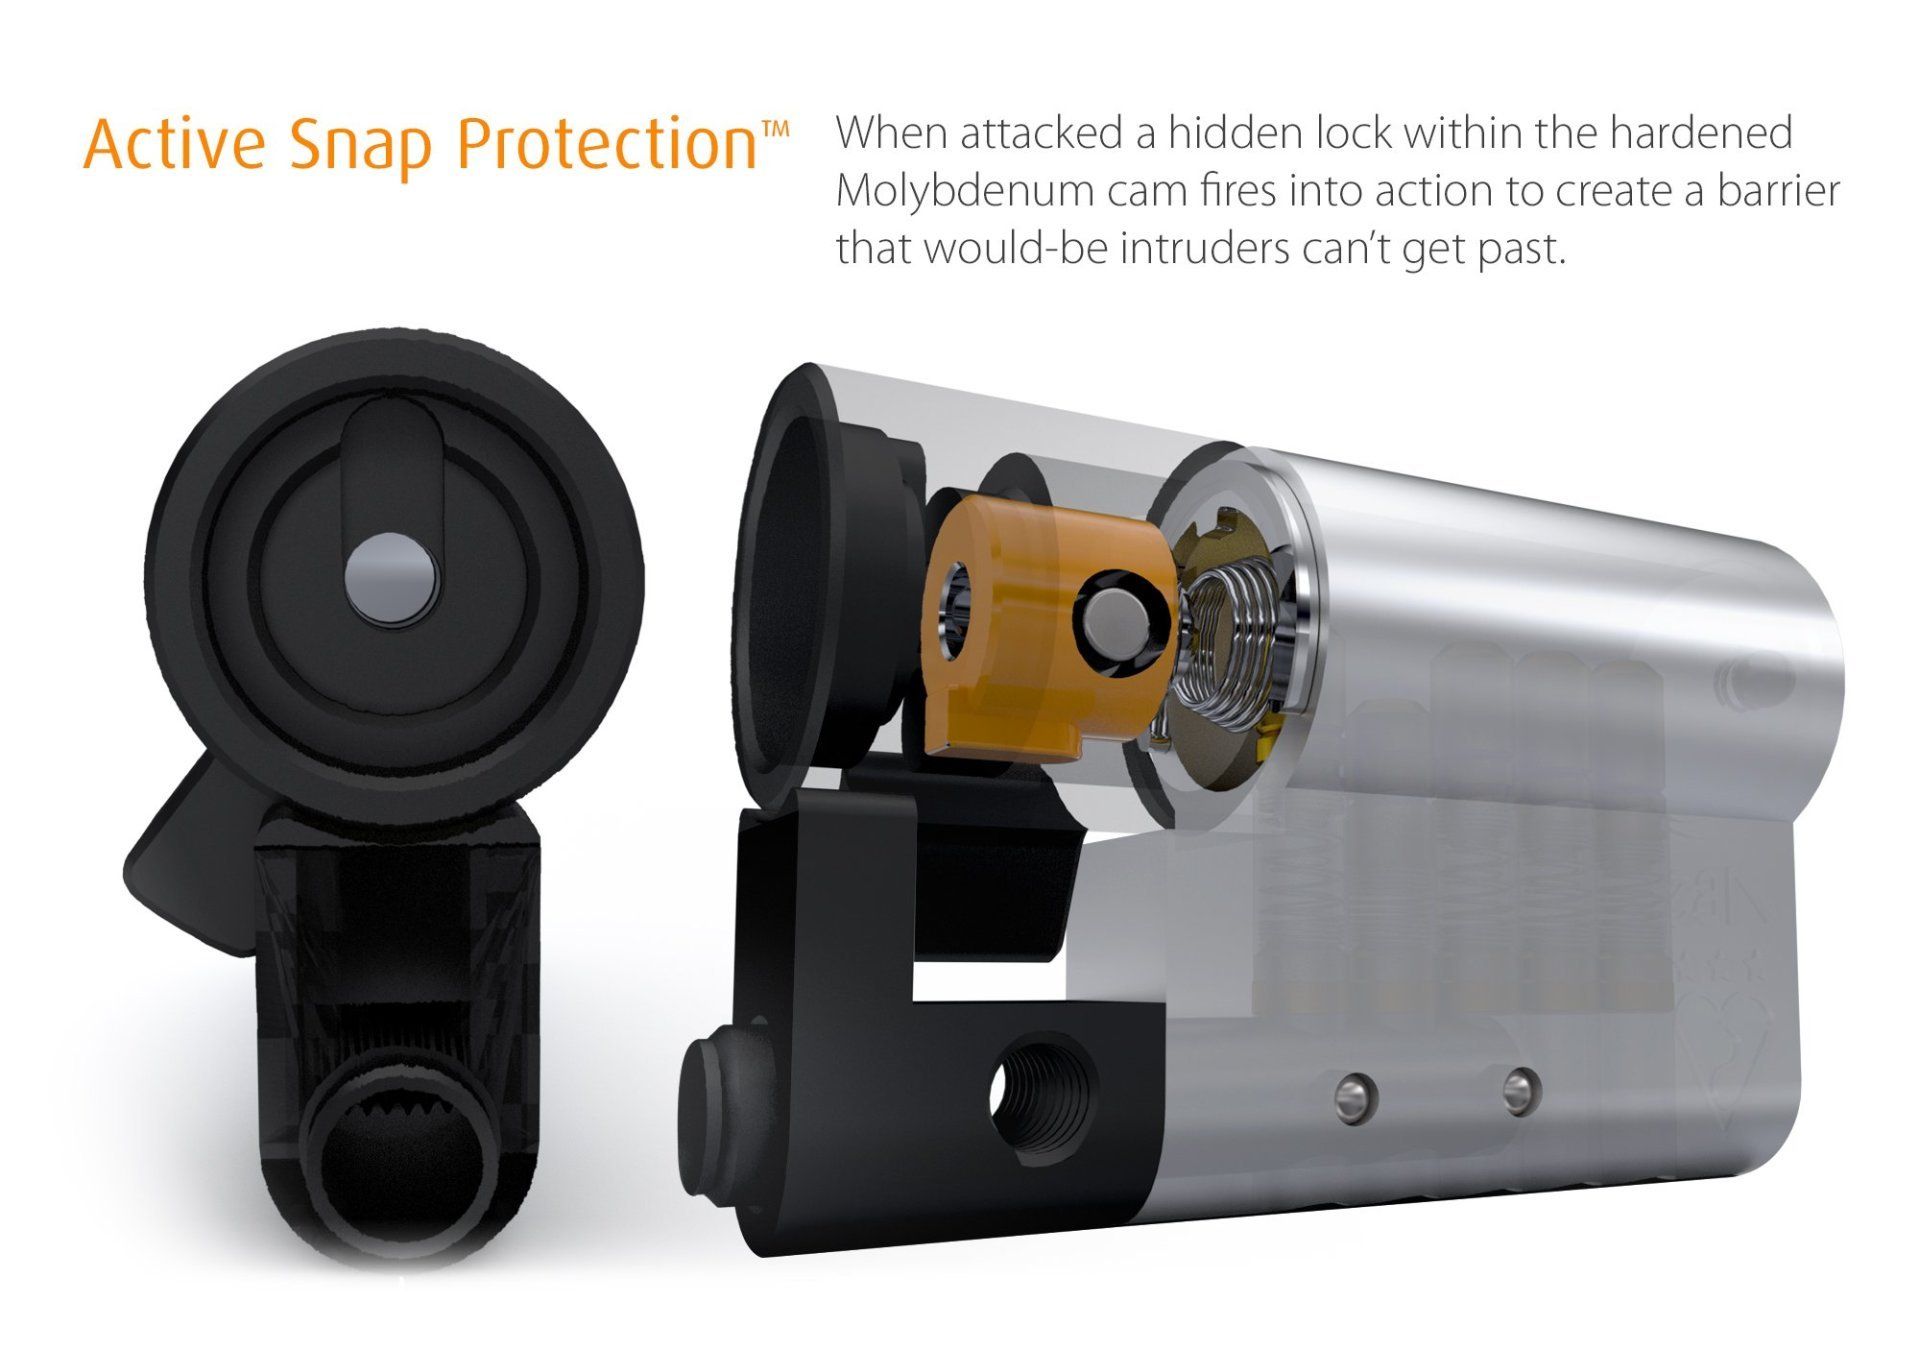 A picture of an active snap protection locking barrel